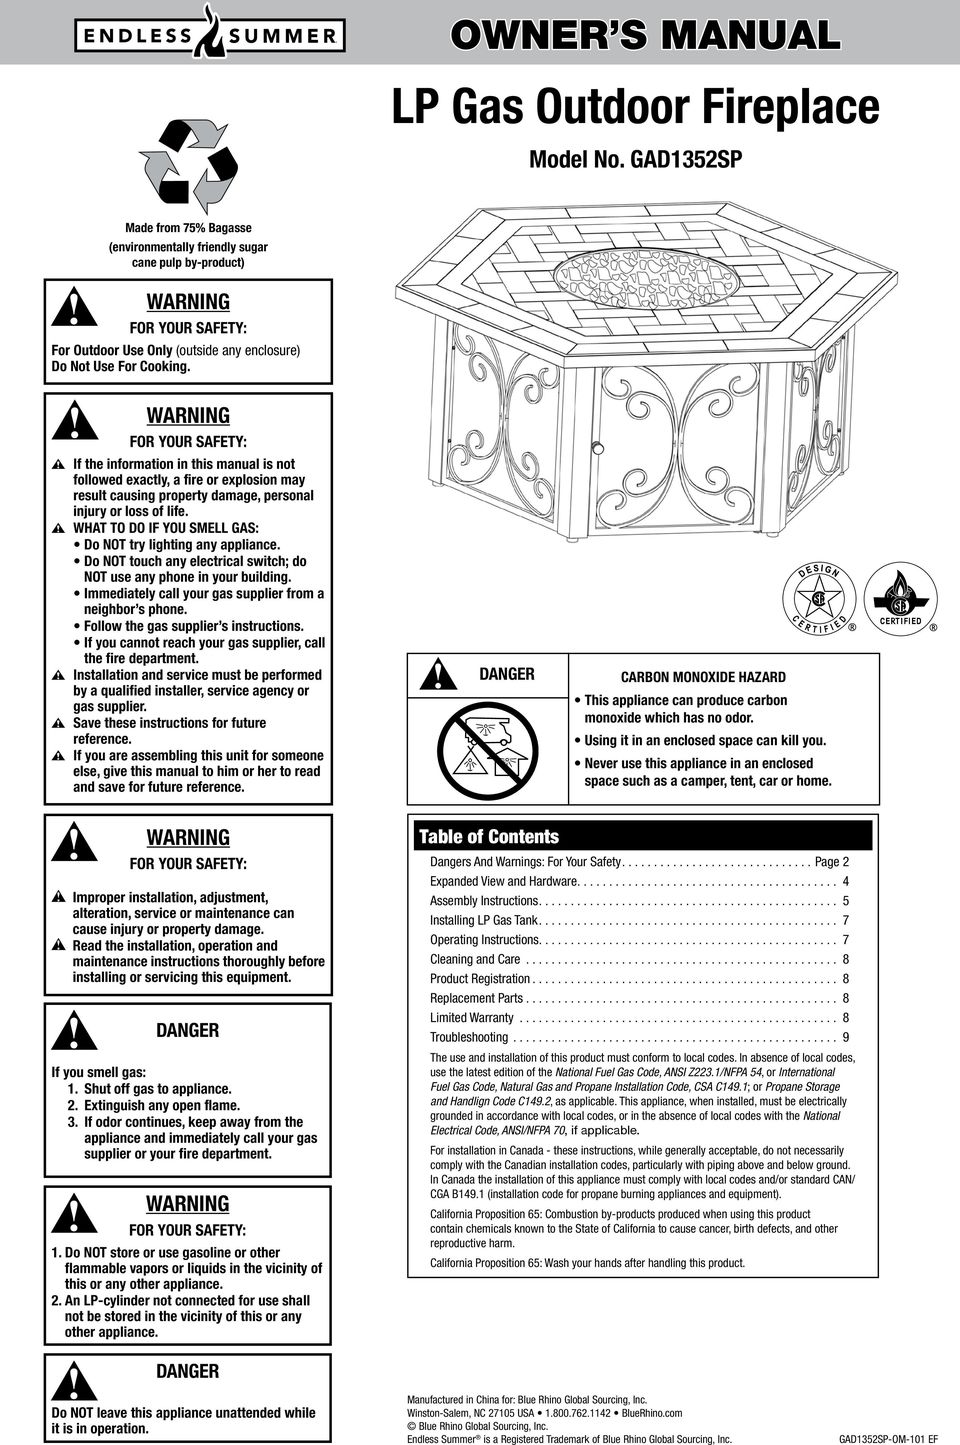 WARNING FOR YOUR SAFETY: If the information in this manual is not followed exactly, a fire or explosion may result causing property damage, personal injury or loss of life.